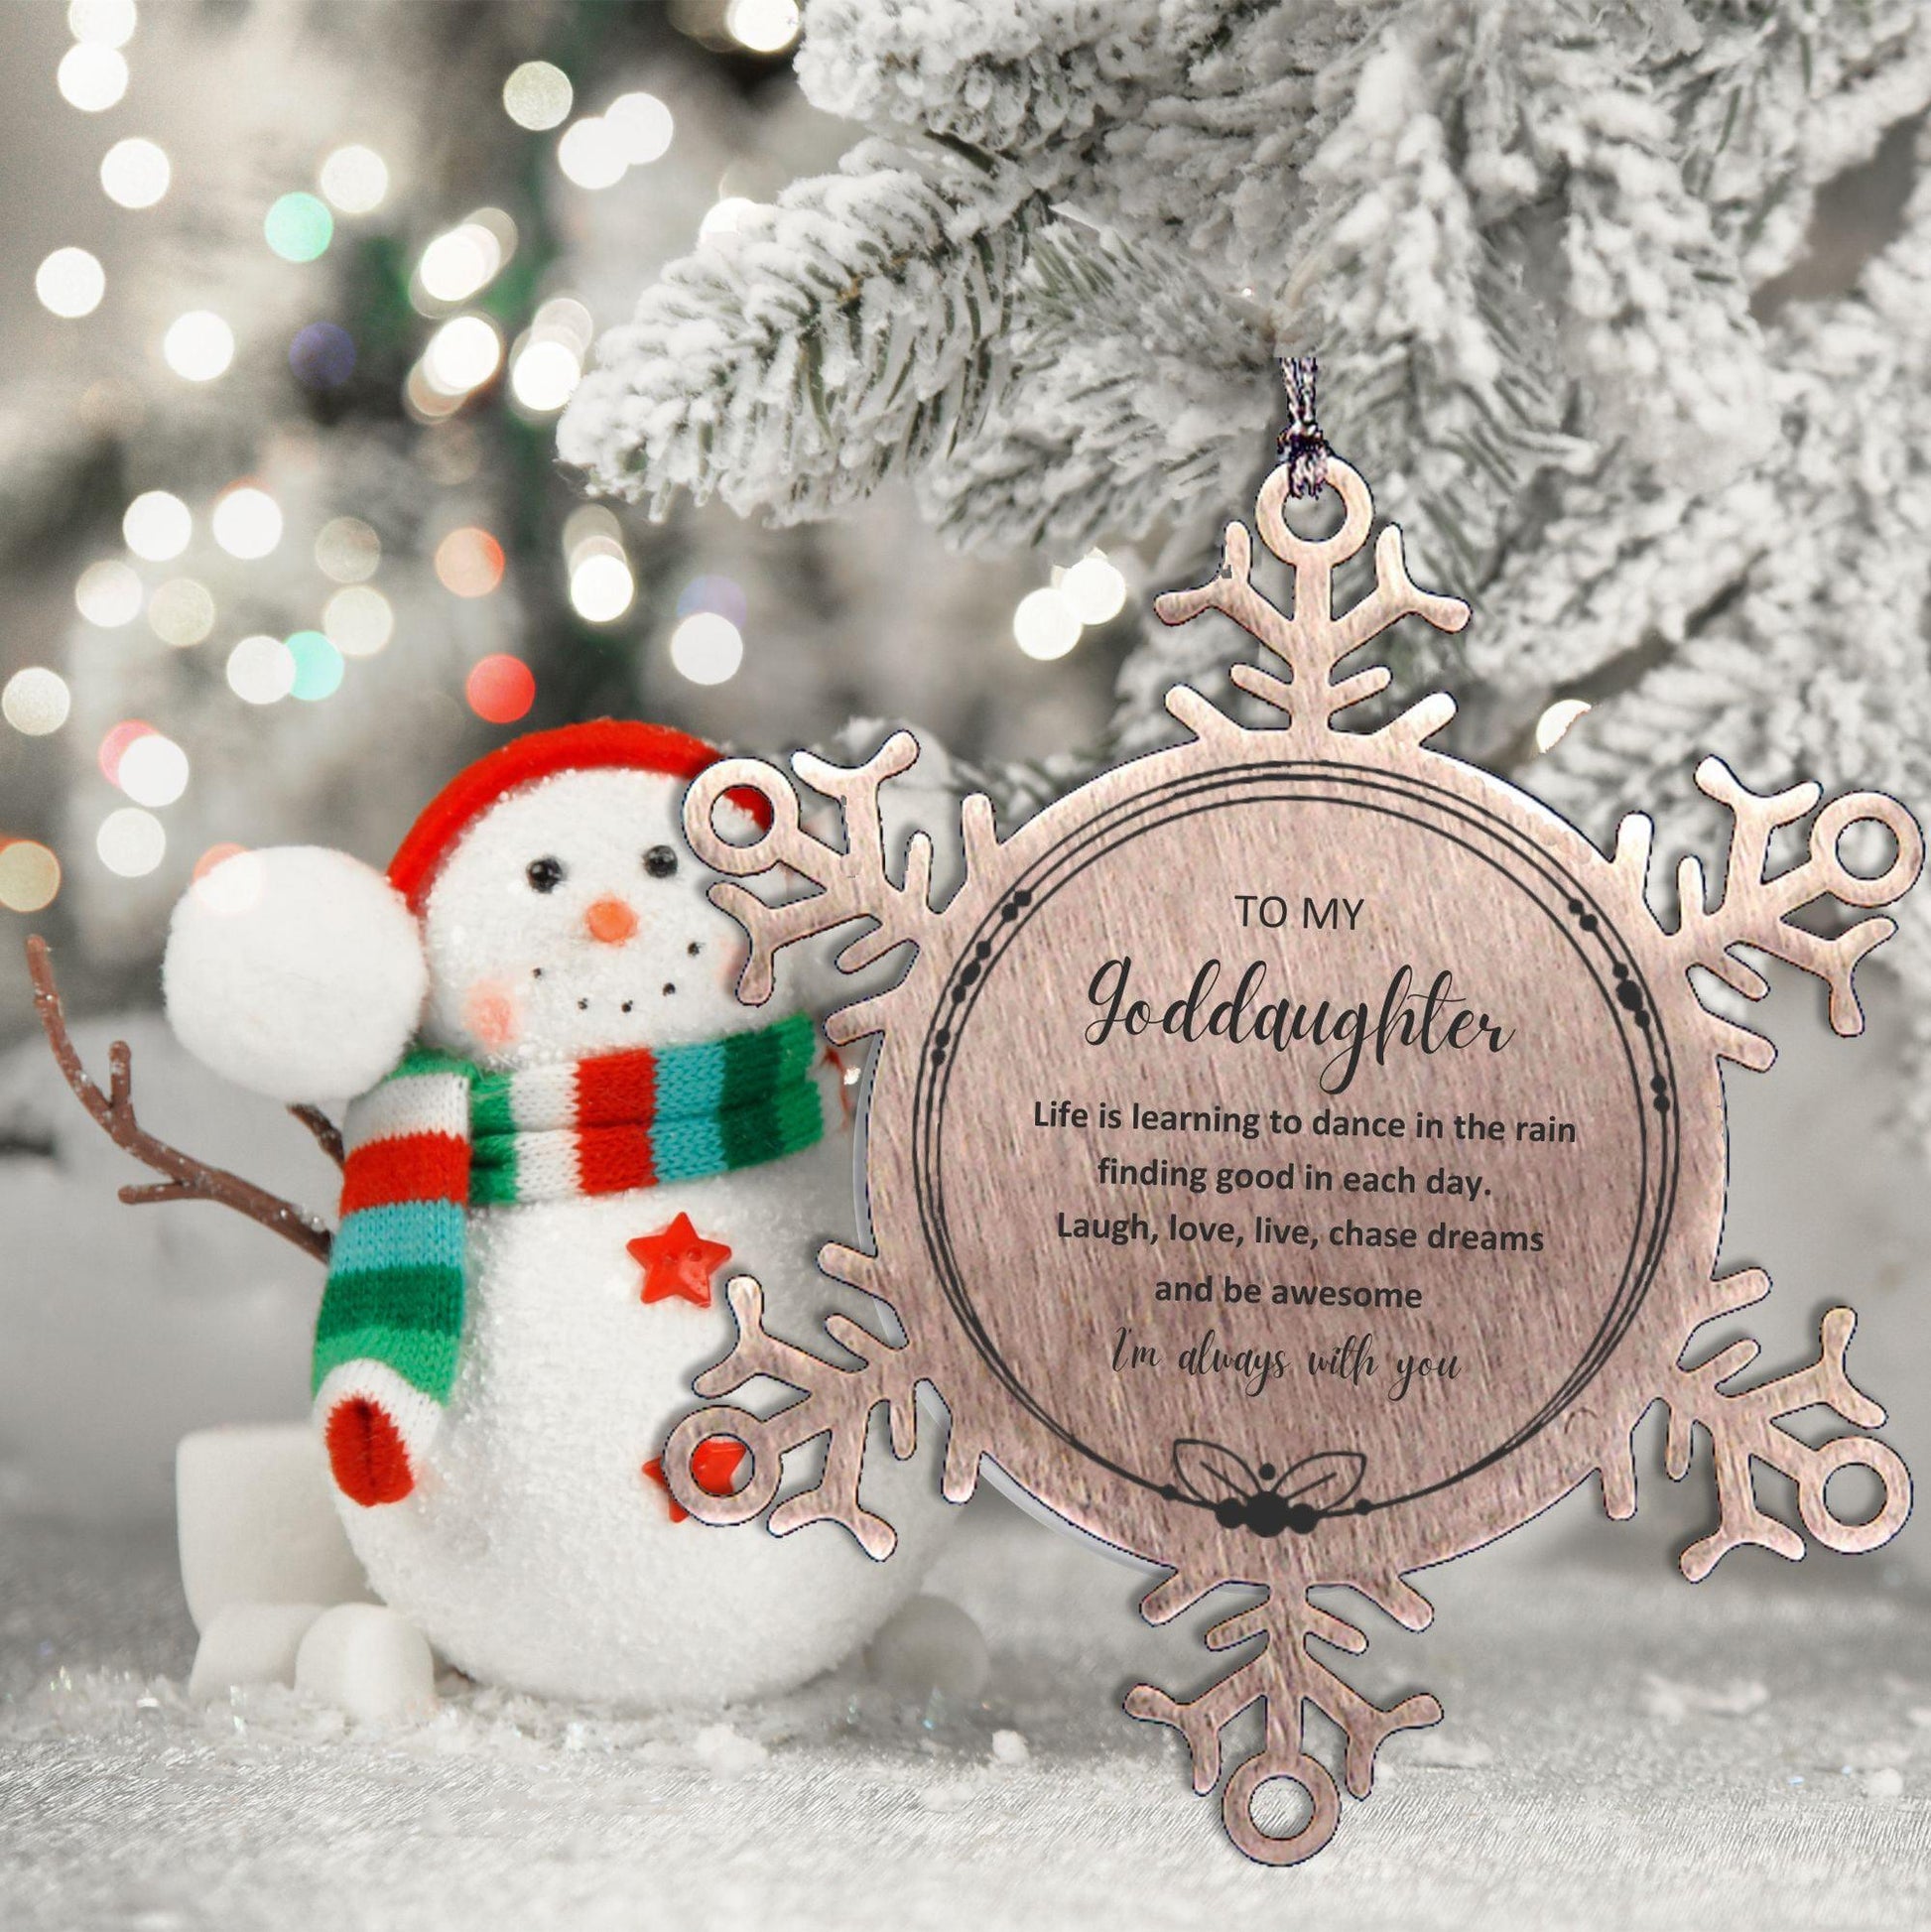 Goddaughter Christmas Ornament Gifts, Goddaughter Snowflake Ornament, Motivational Goddaughter Engraved Gifts, Birthday Gifts For Goddaughter, To My Goddaughter Life is learning to dance in the rain, finding good in each day. I'm always with you - Mallard Moon Gift Shop